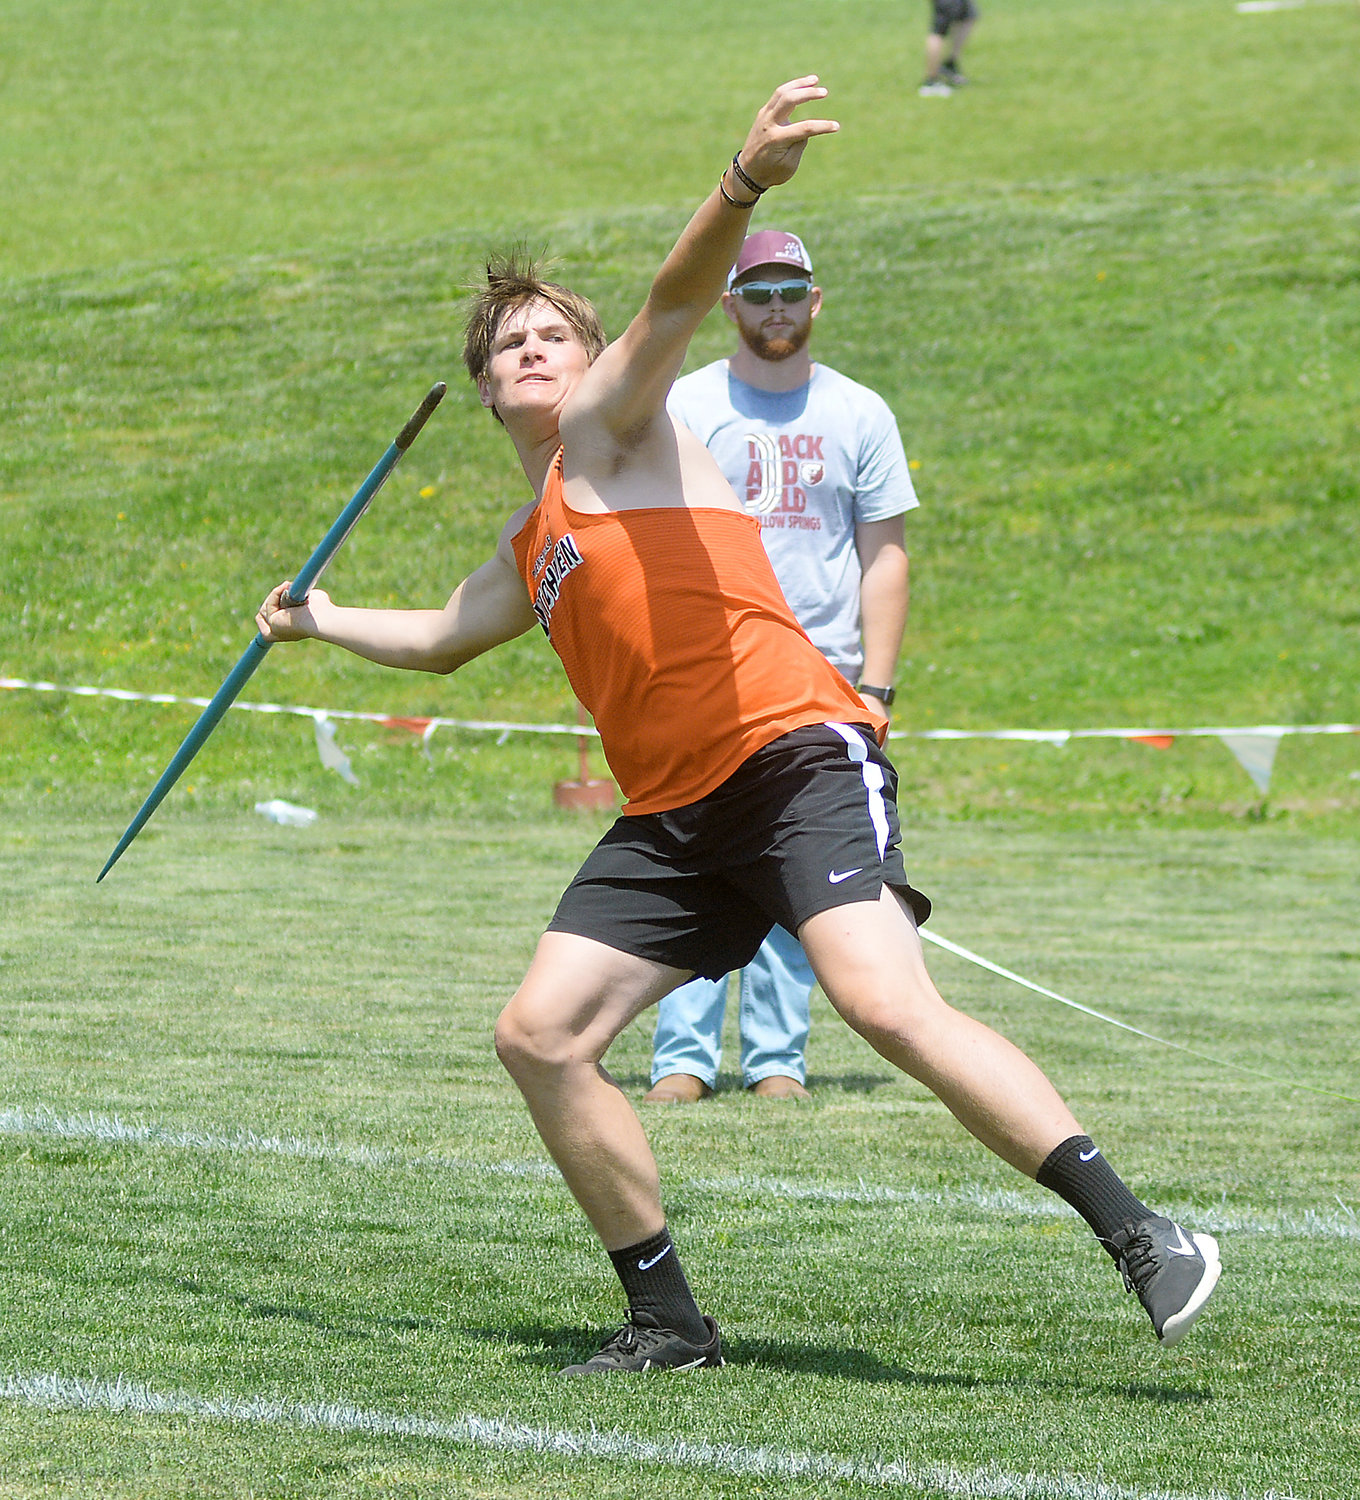 Garrett Crosby lets one of his six throws fly in the boys javelin during Saturday’s Missouri State High School Activities Association (MSHSAA) Class 3, District 5 track meet at West Plains High School in southwest Missouri. Crosby went on to win a district title.